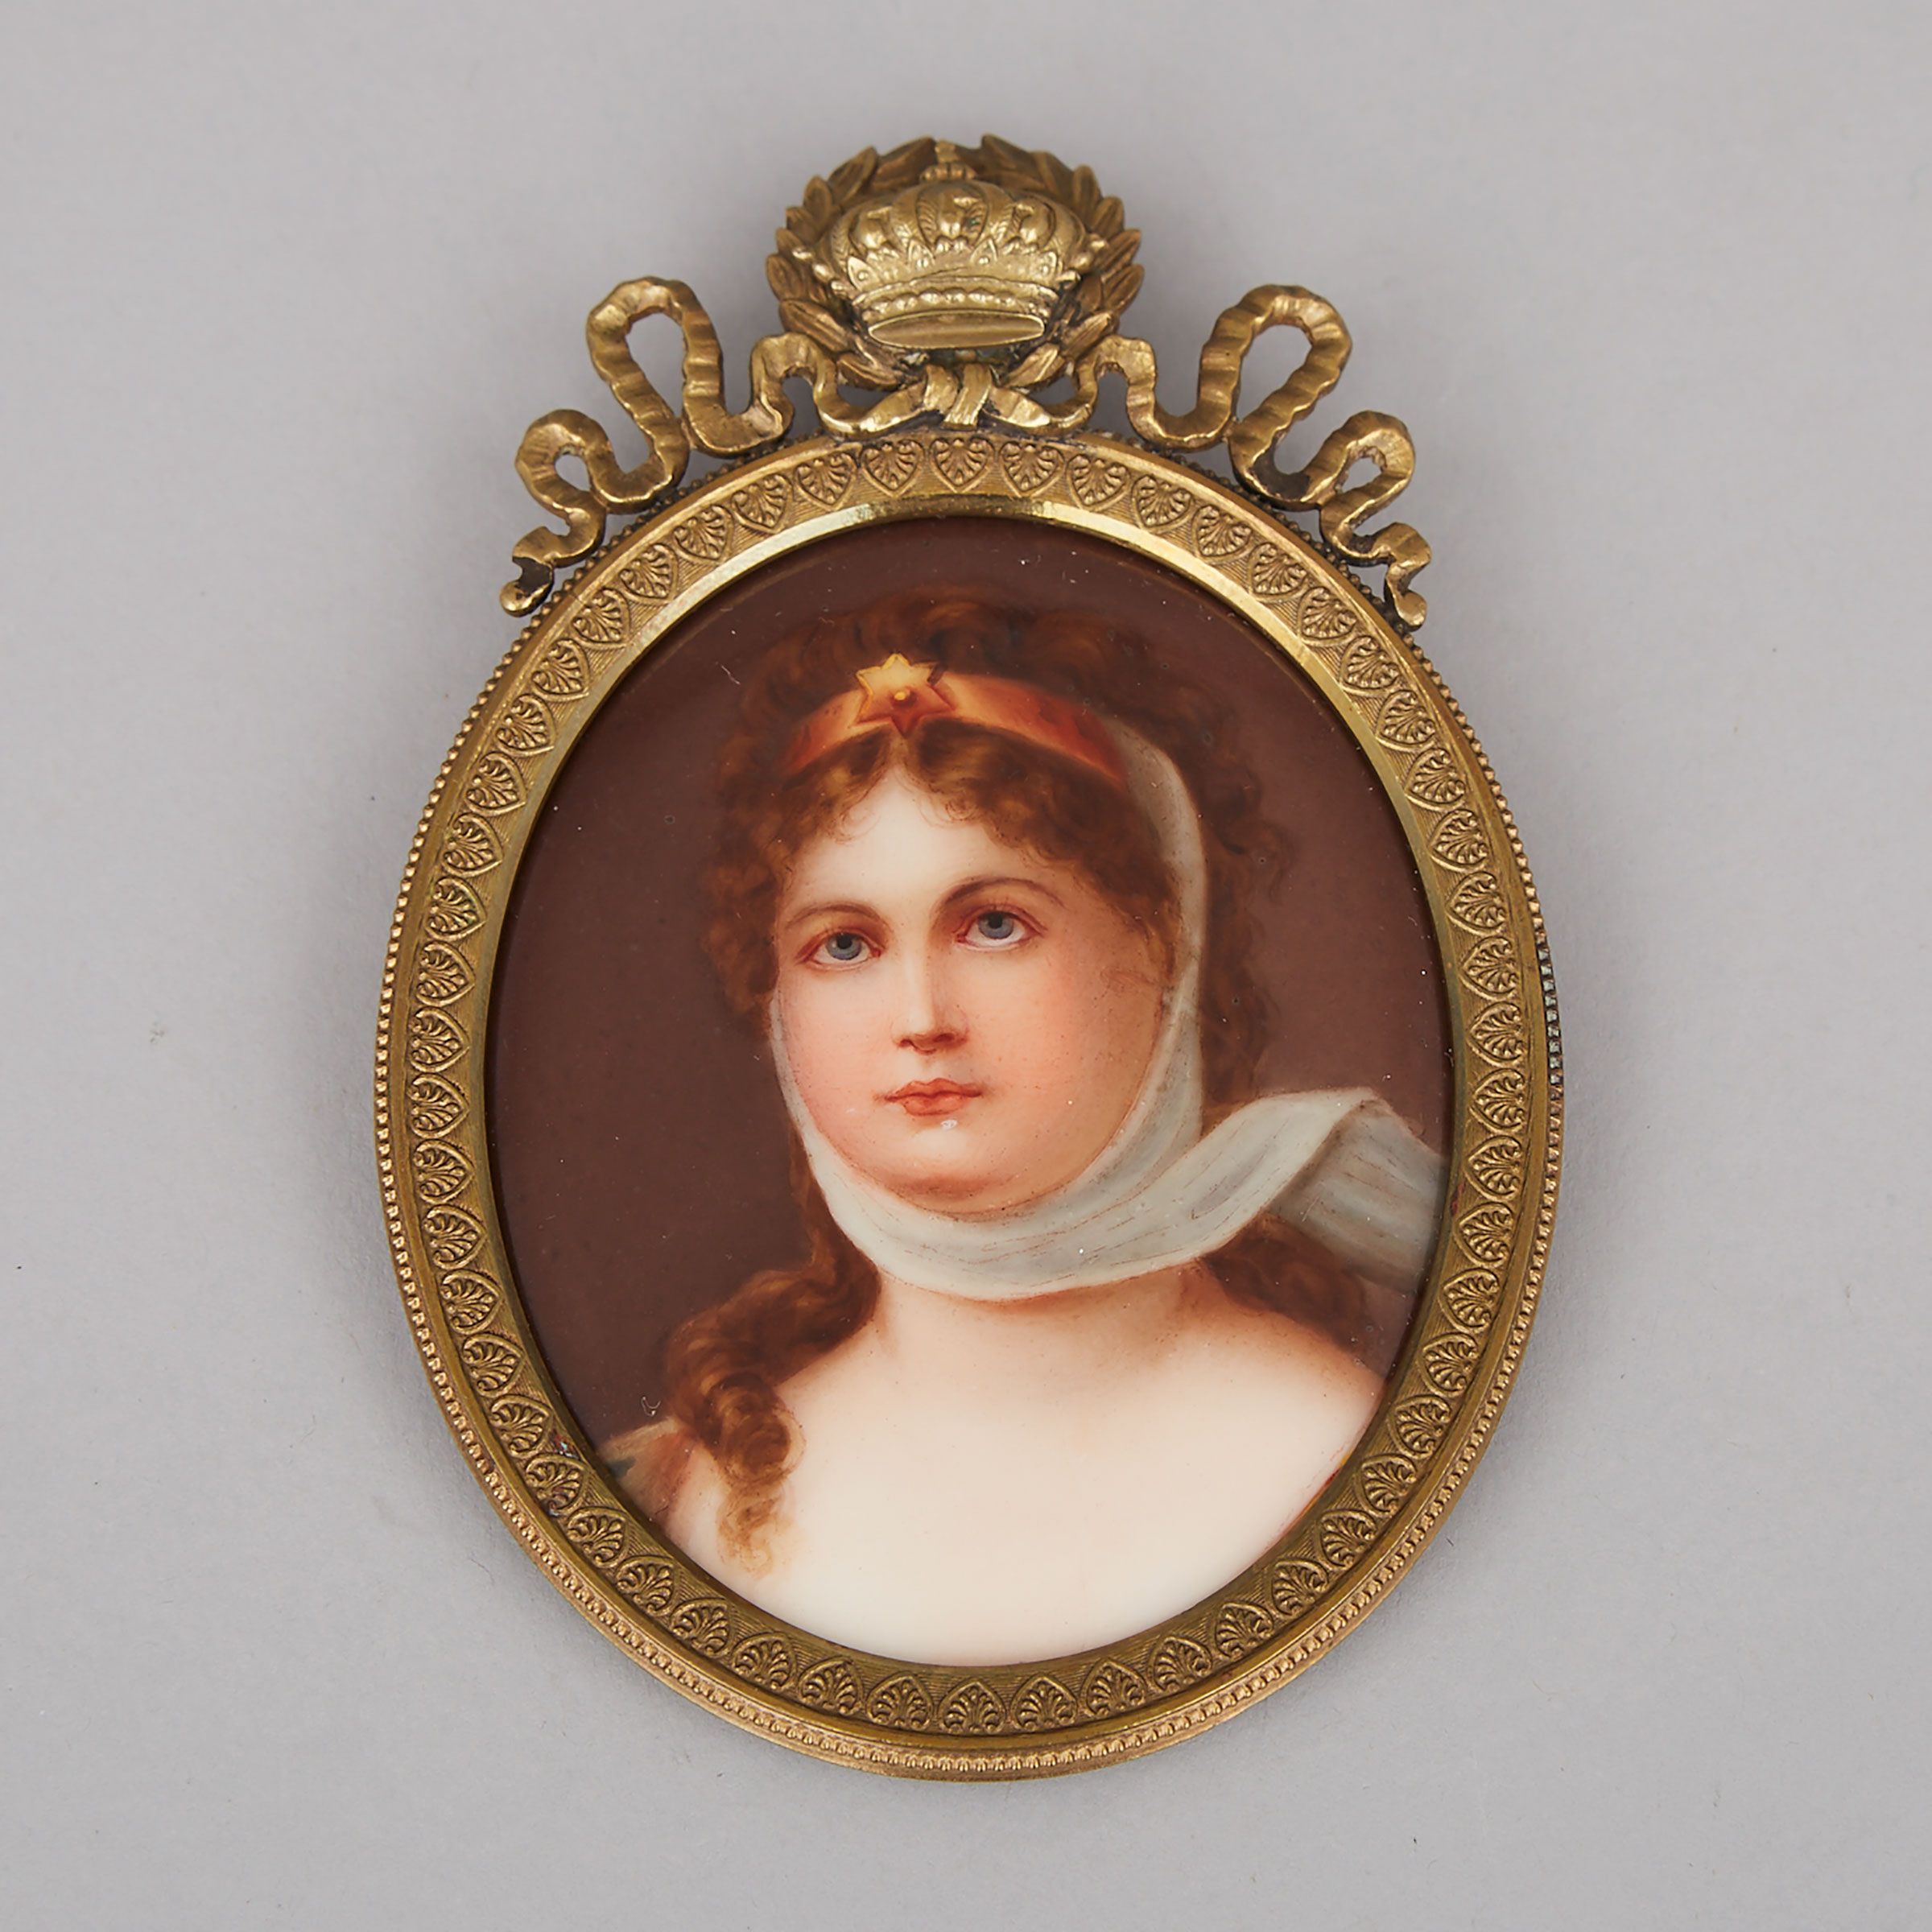 Firenze Oval Portrait Plaque of Queen Louise of Prussia, after Richter, c.1900